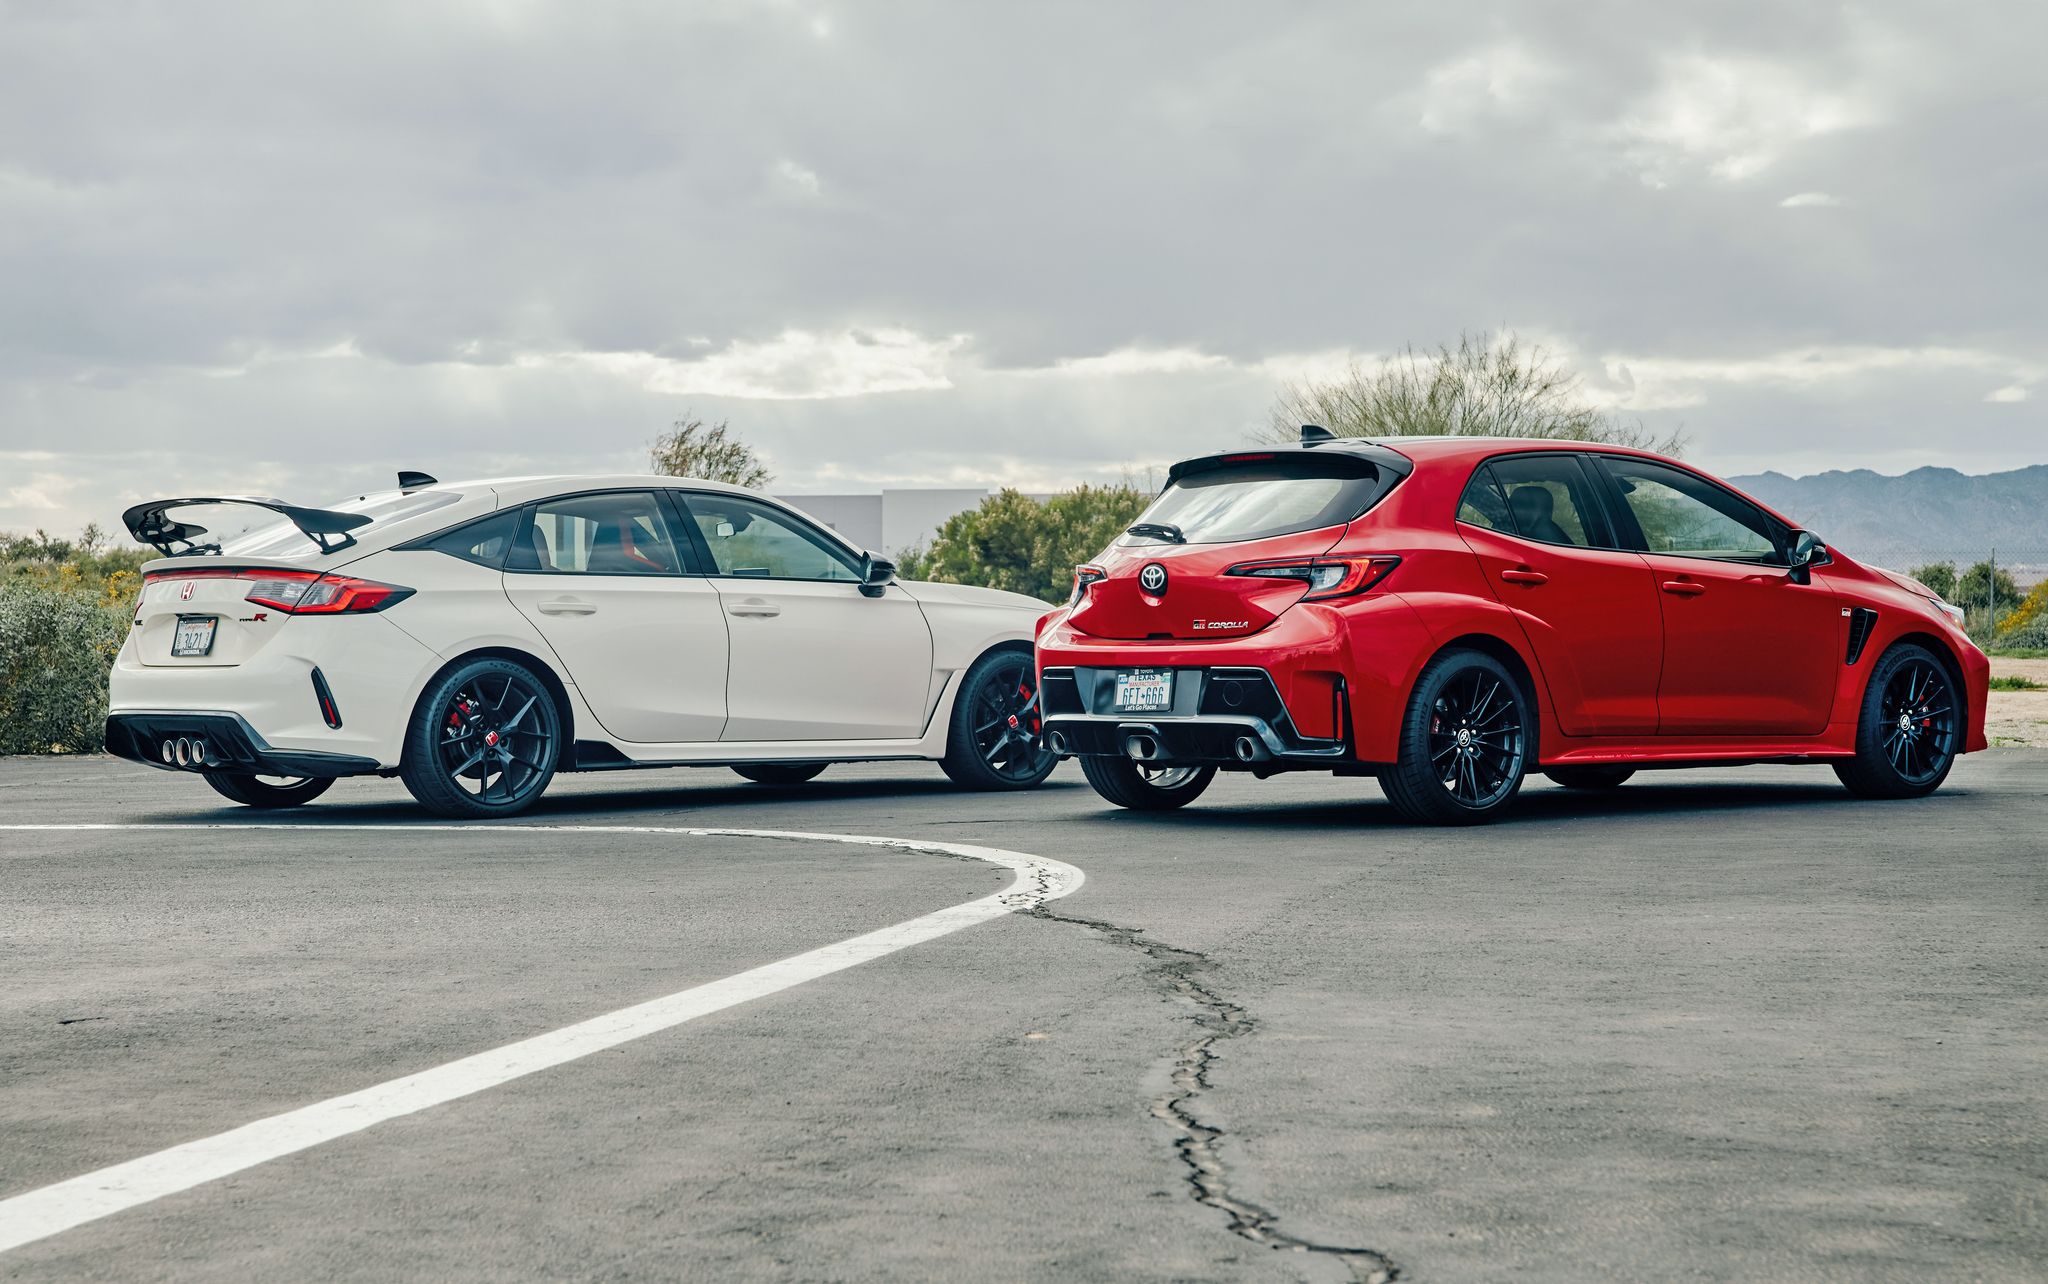 2023 honda civic type r and the toyota 2023 gr corolla